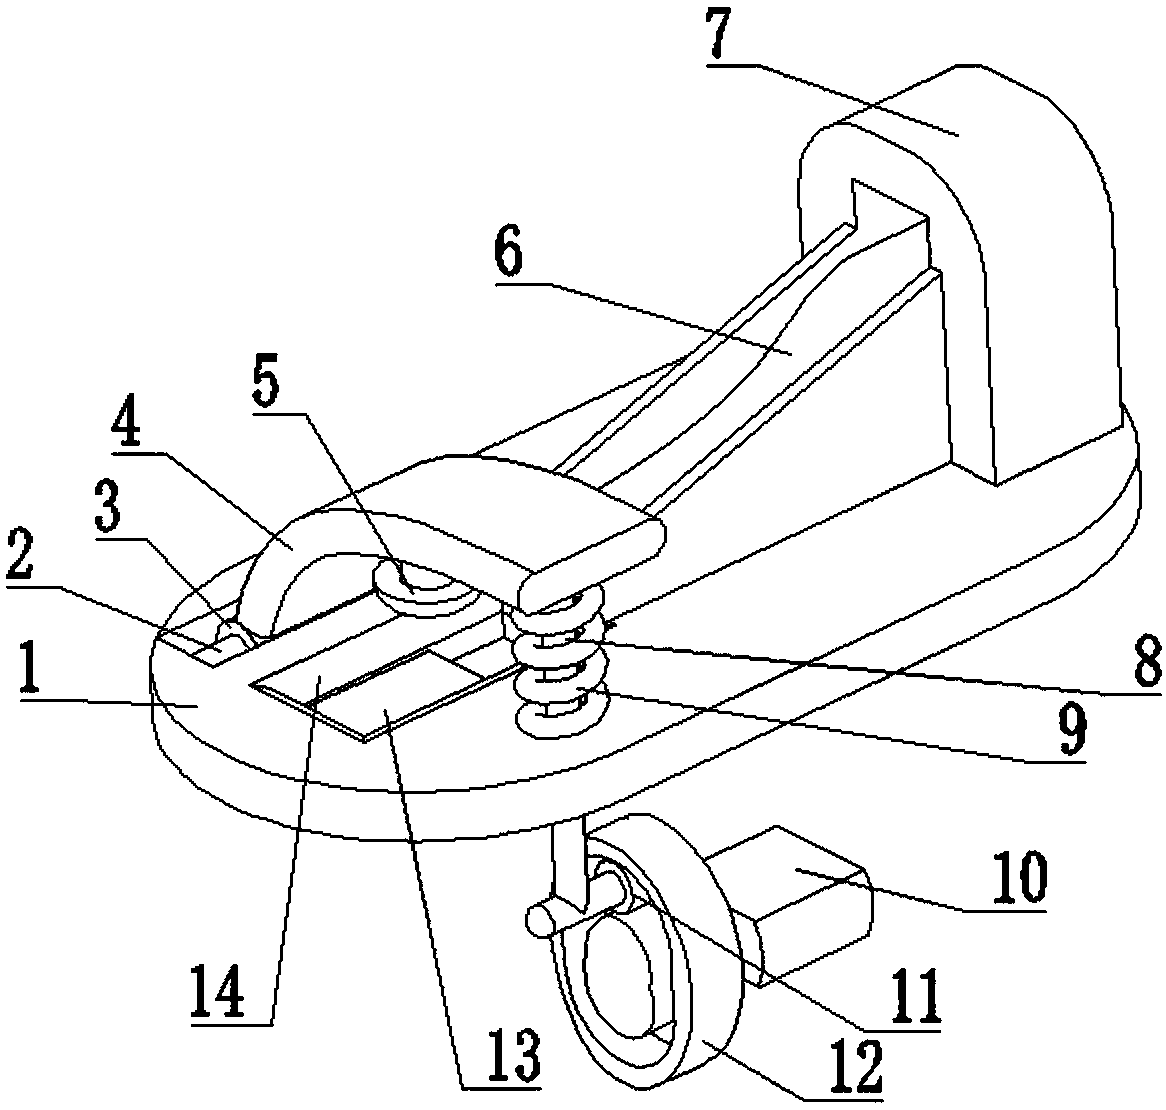 A continuous peeling device